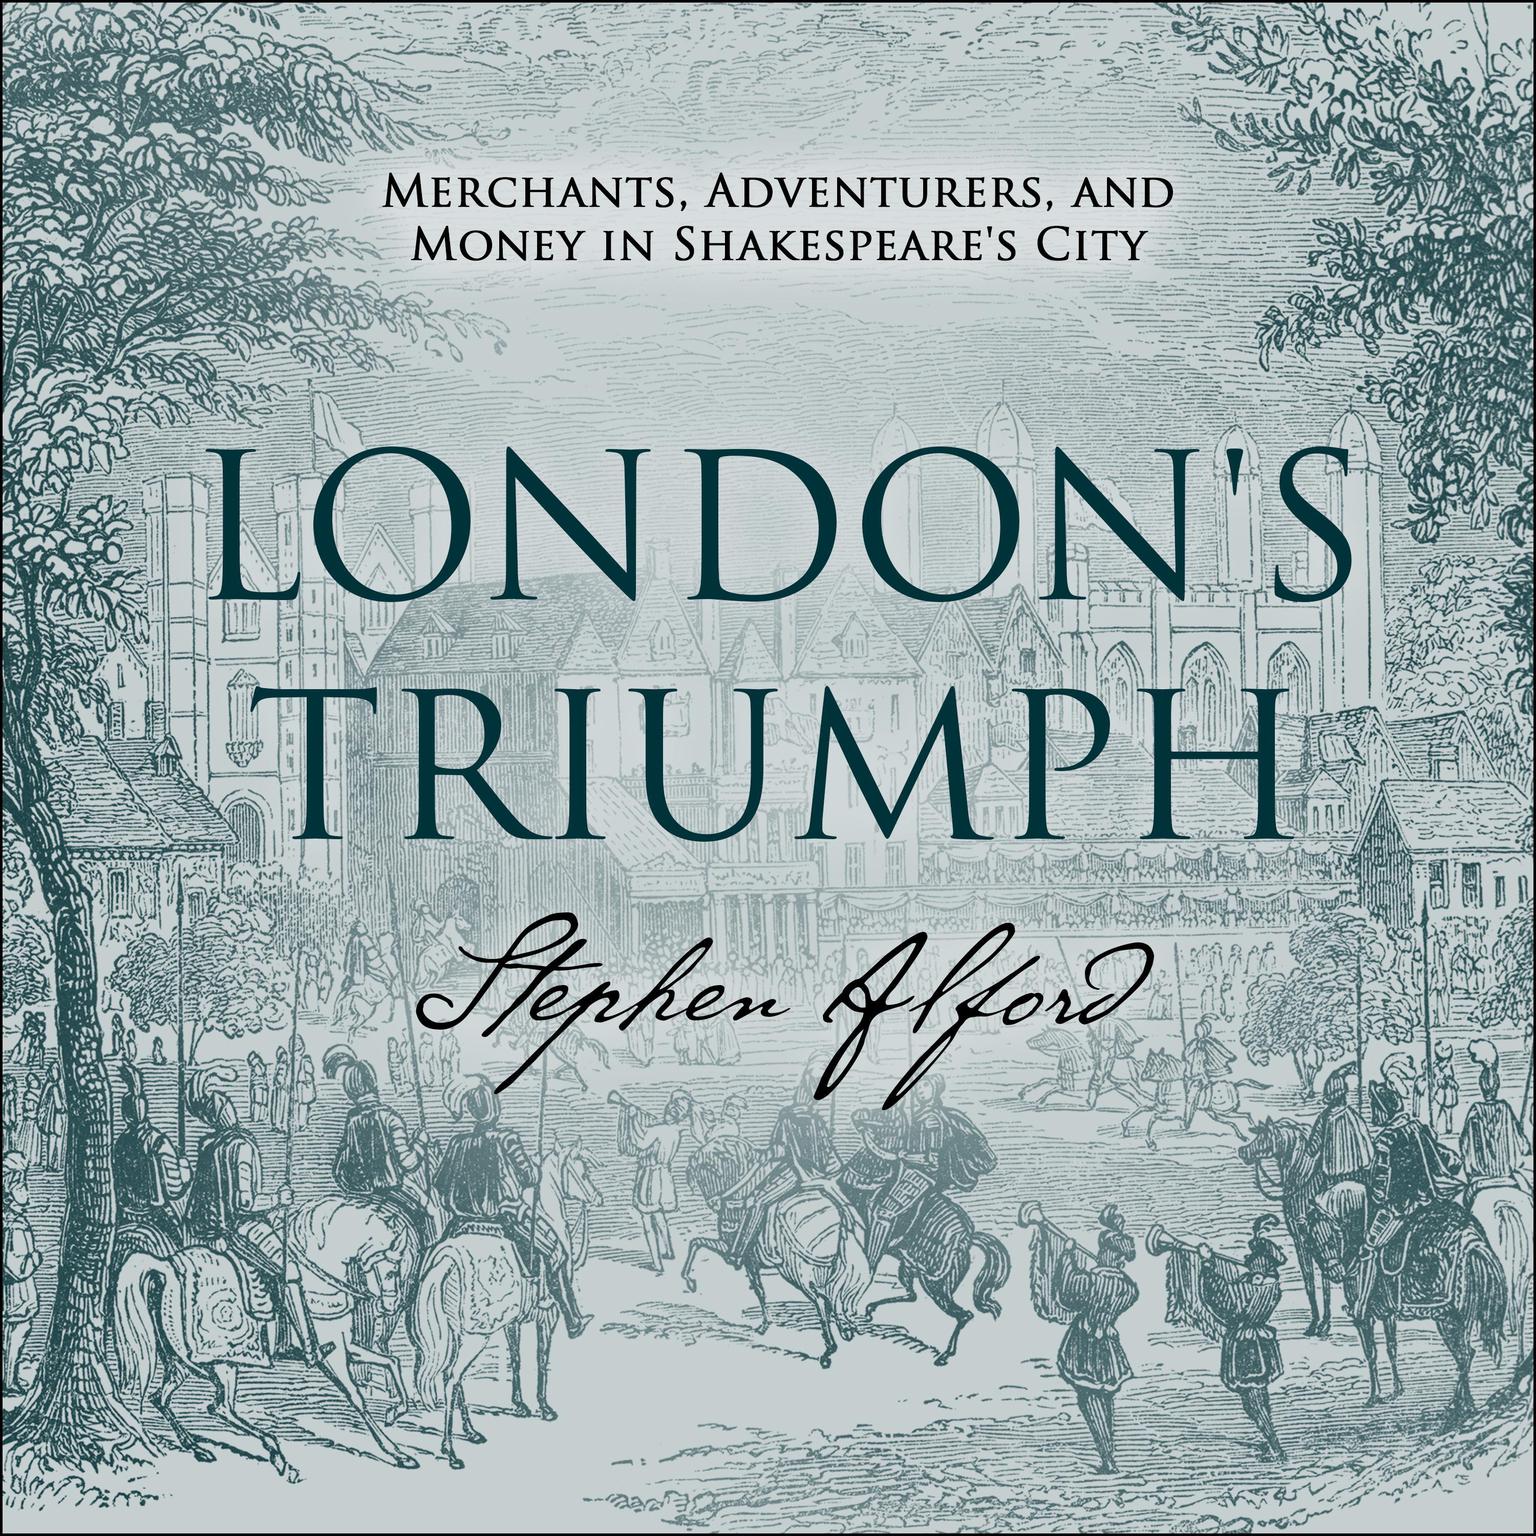 Londons Triumph: Merchants, Adventurers, and Money in Shakespeares City Audiobook, by Stephen Alford